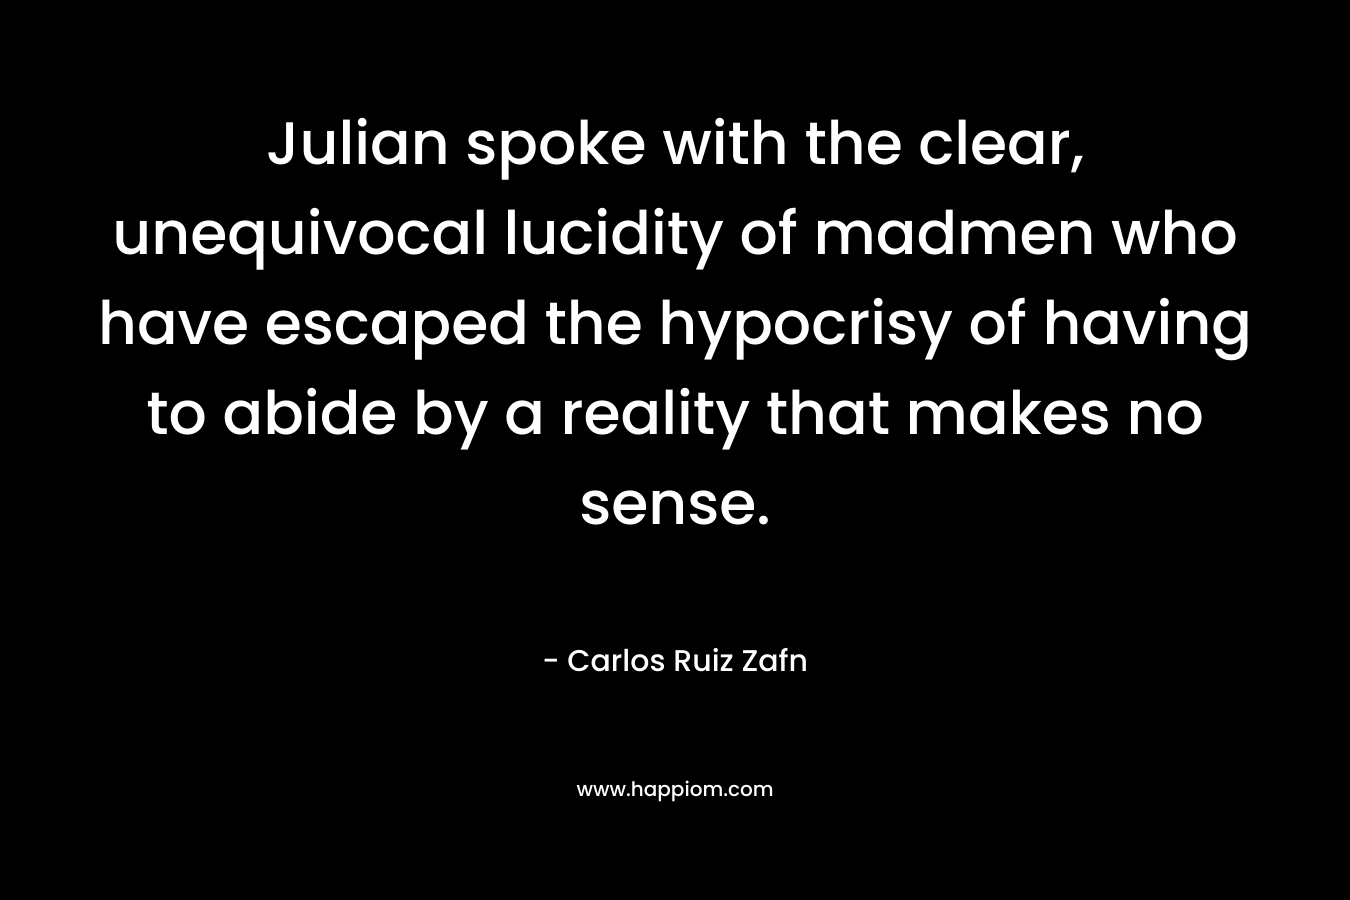 Julian spoke with the clear, unequivocal lucidity of madmen who have escaped the hypocrisy of having to abide by a reality that makes no sense. – Carlos Ruiz Zafn